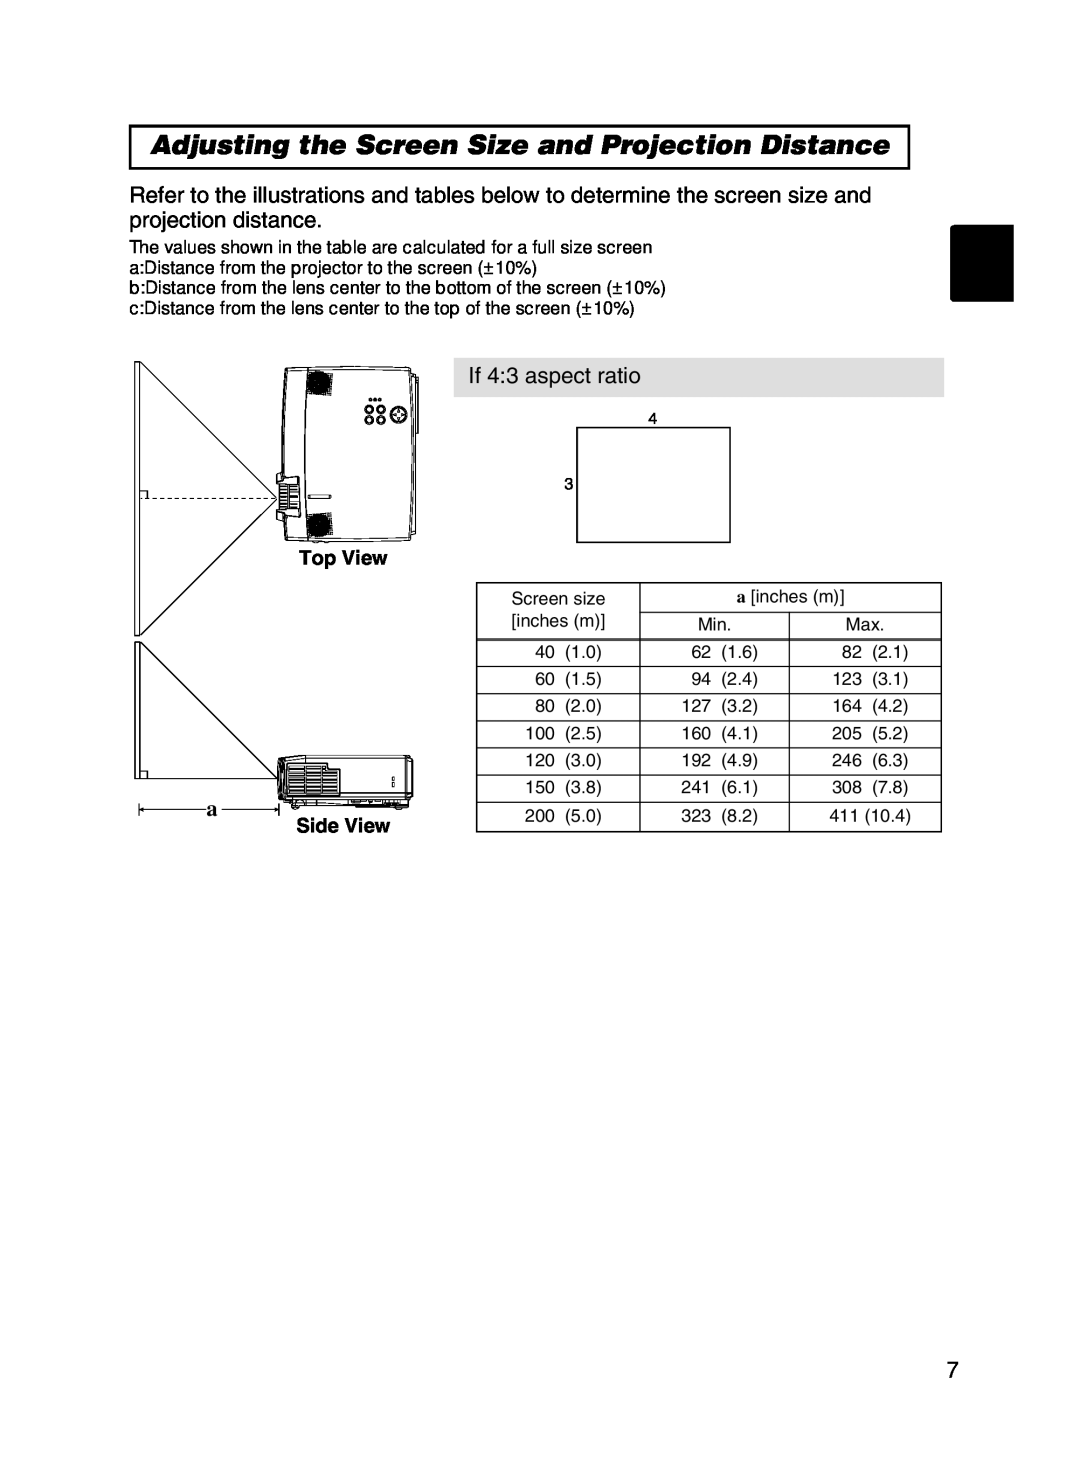 Hitachi CPX385W user manual Adjusting the Screen Size and Projection Distance, If 4:3 aspect ratio 